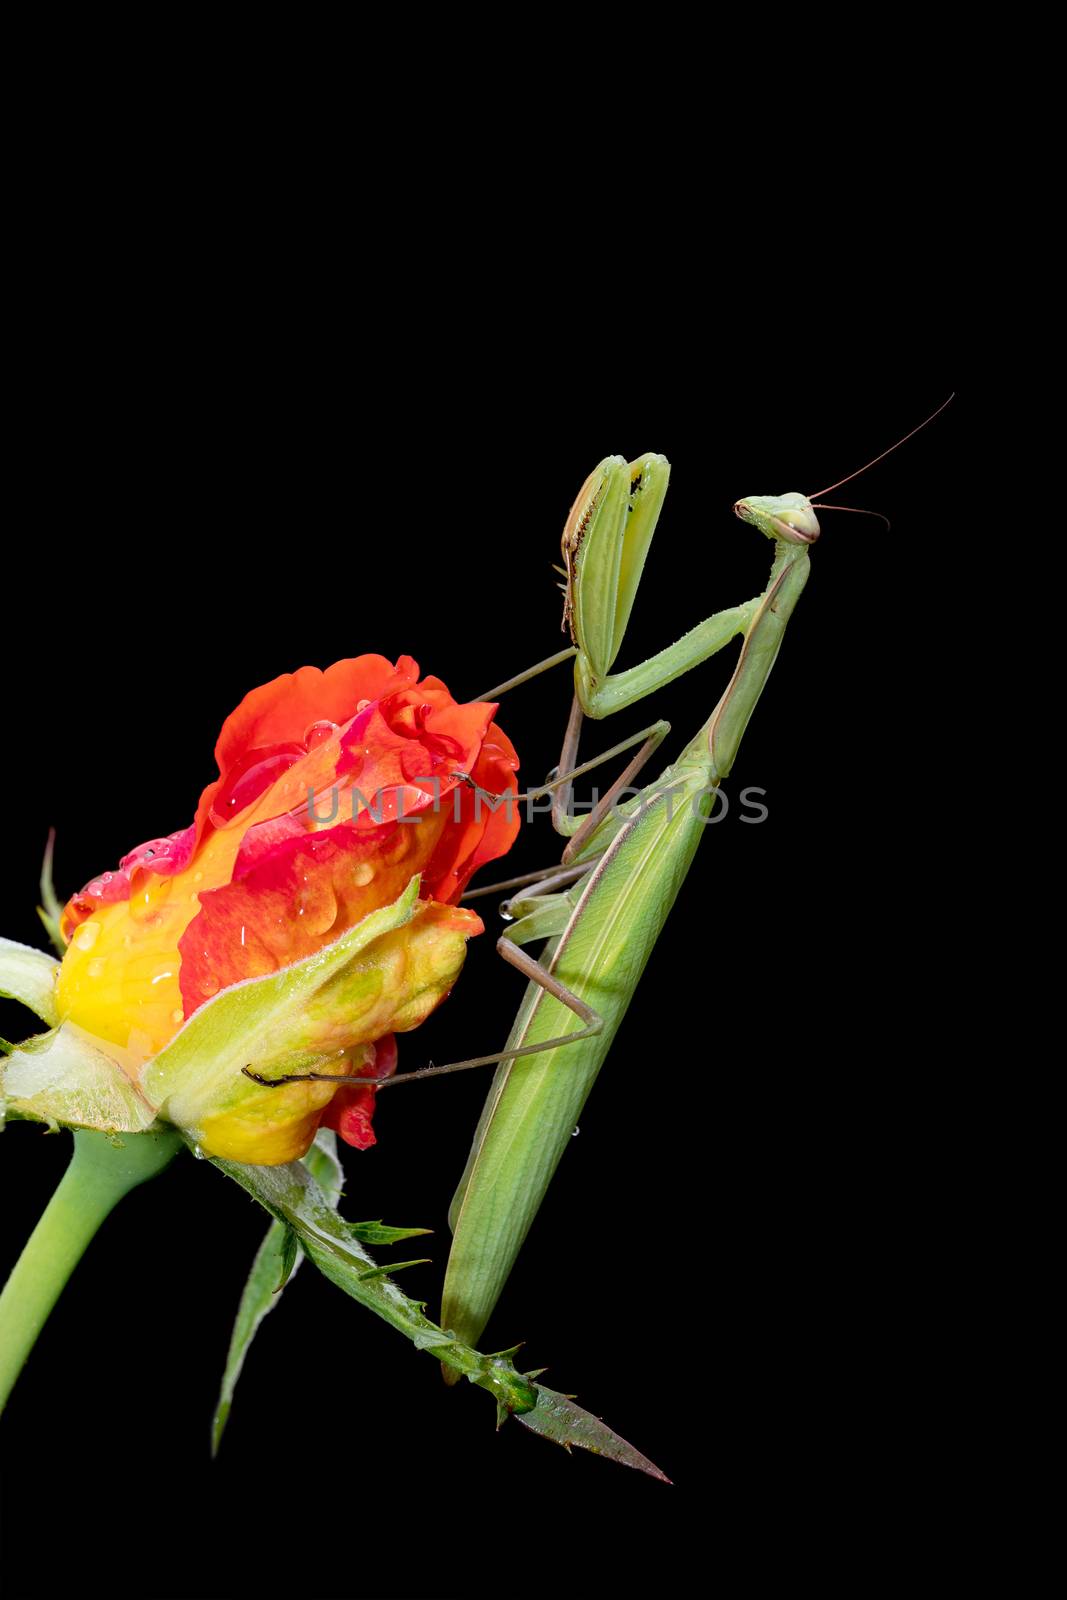 Green Praying Mantis, Mantis religiosa, sitting on a rosebud isolated on black in its typical pose, waiting for insects to catch them. Outside of Europe this species is also called European Mantis.